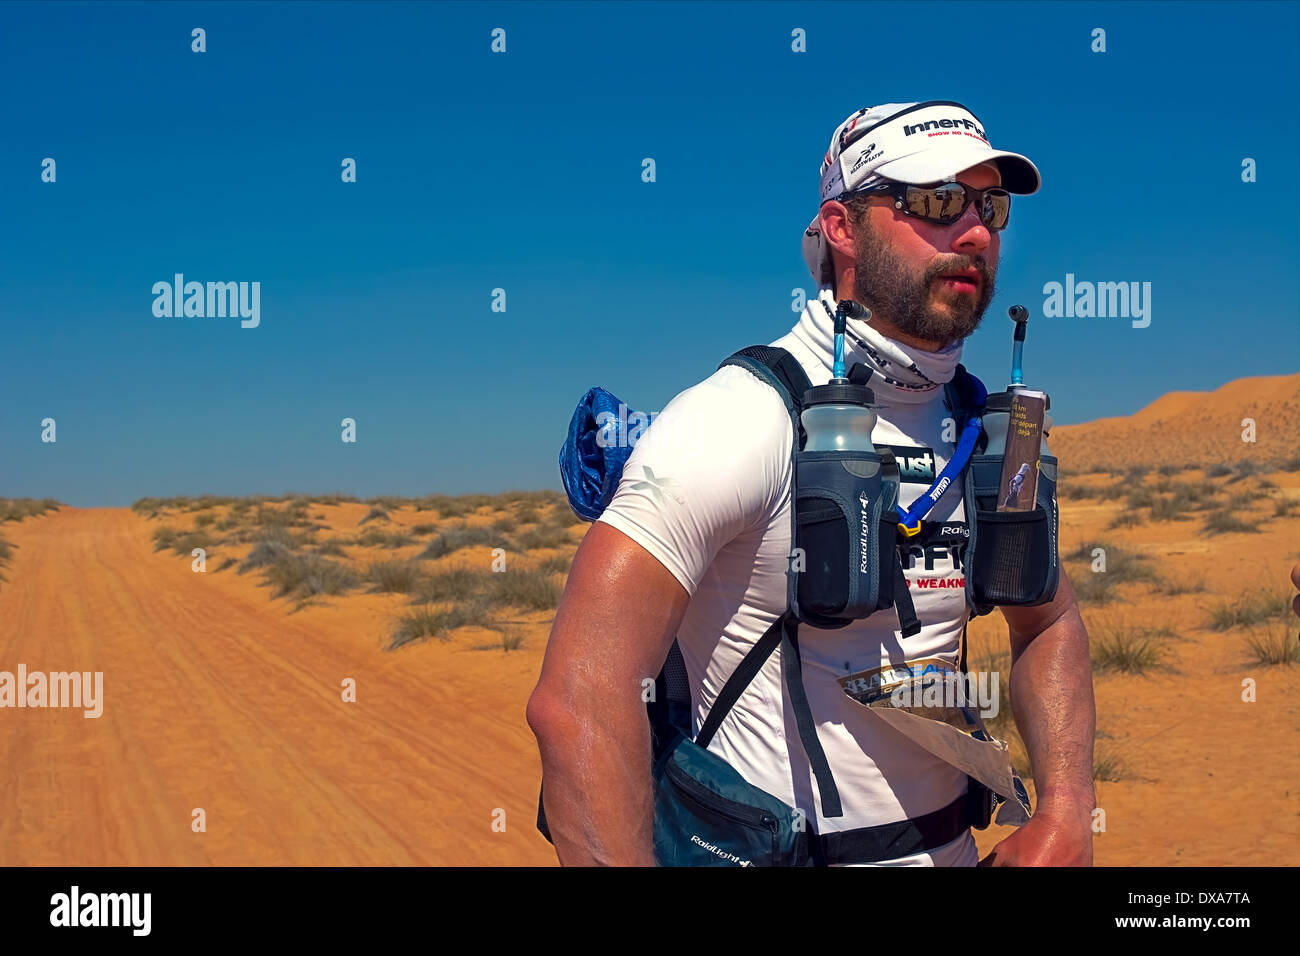 Unidentified runner resting after first stage of desert endurance running Transomania Stock Photo